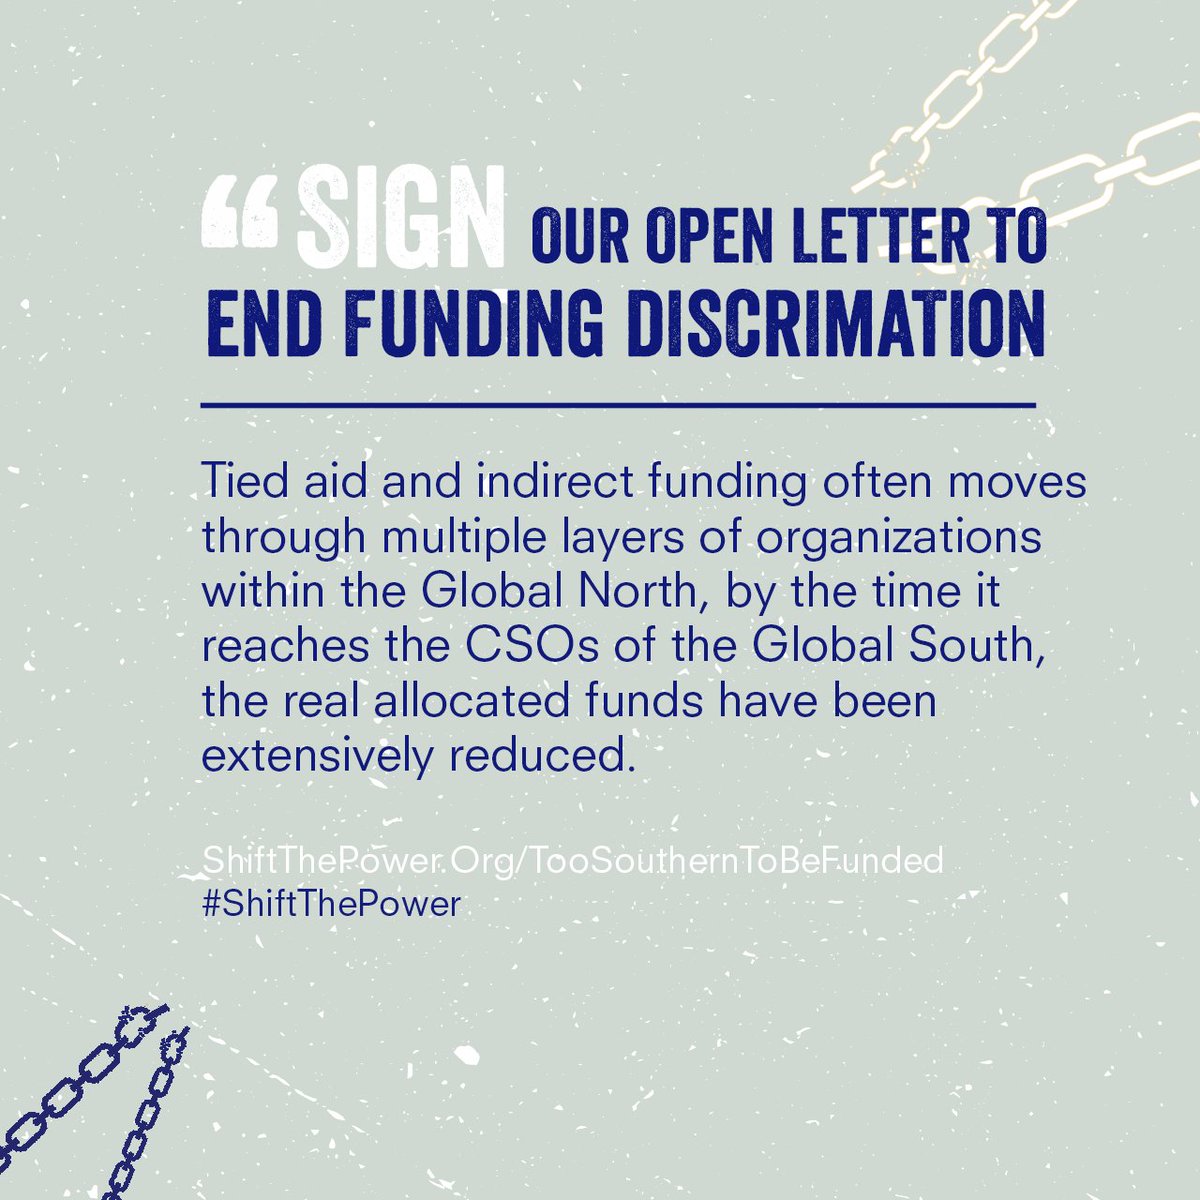 Grassroots activists are the backbone of social change, but tied aid restricts their ability to make a meaningful impact. Sign our open letter and stand in solidarity for #UntiedAid. Let's disrupt the status quo! shiftthepower.org/toosoutherntob… #ShiftThePower #TooSouthernToBeFunded